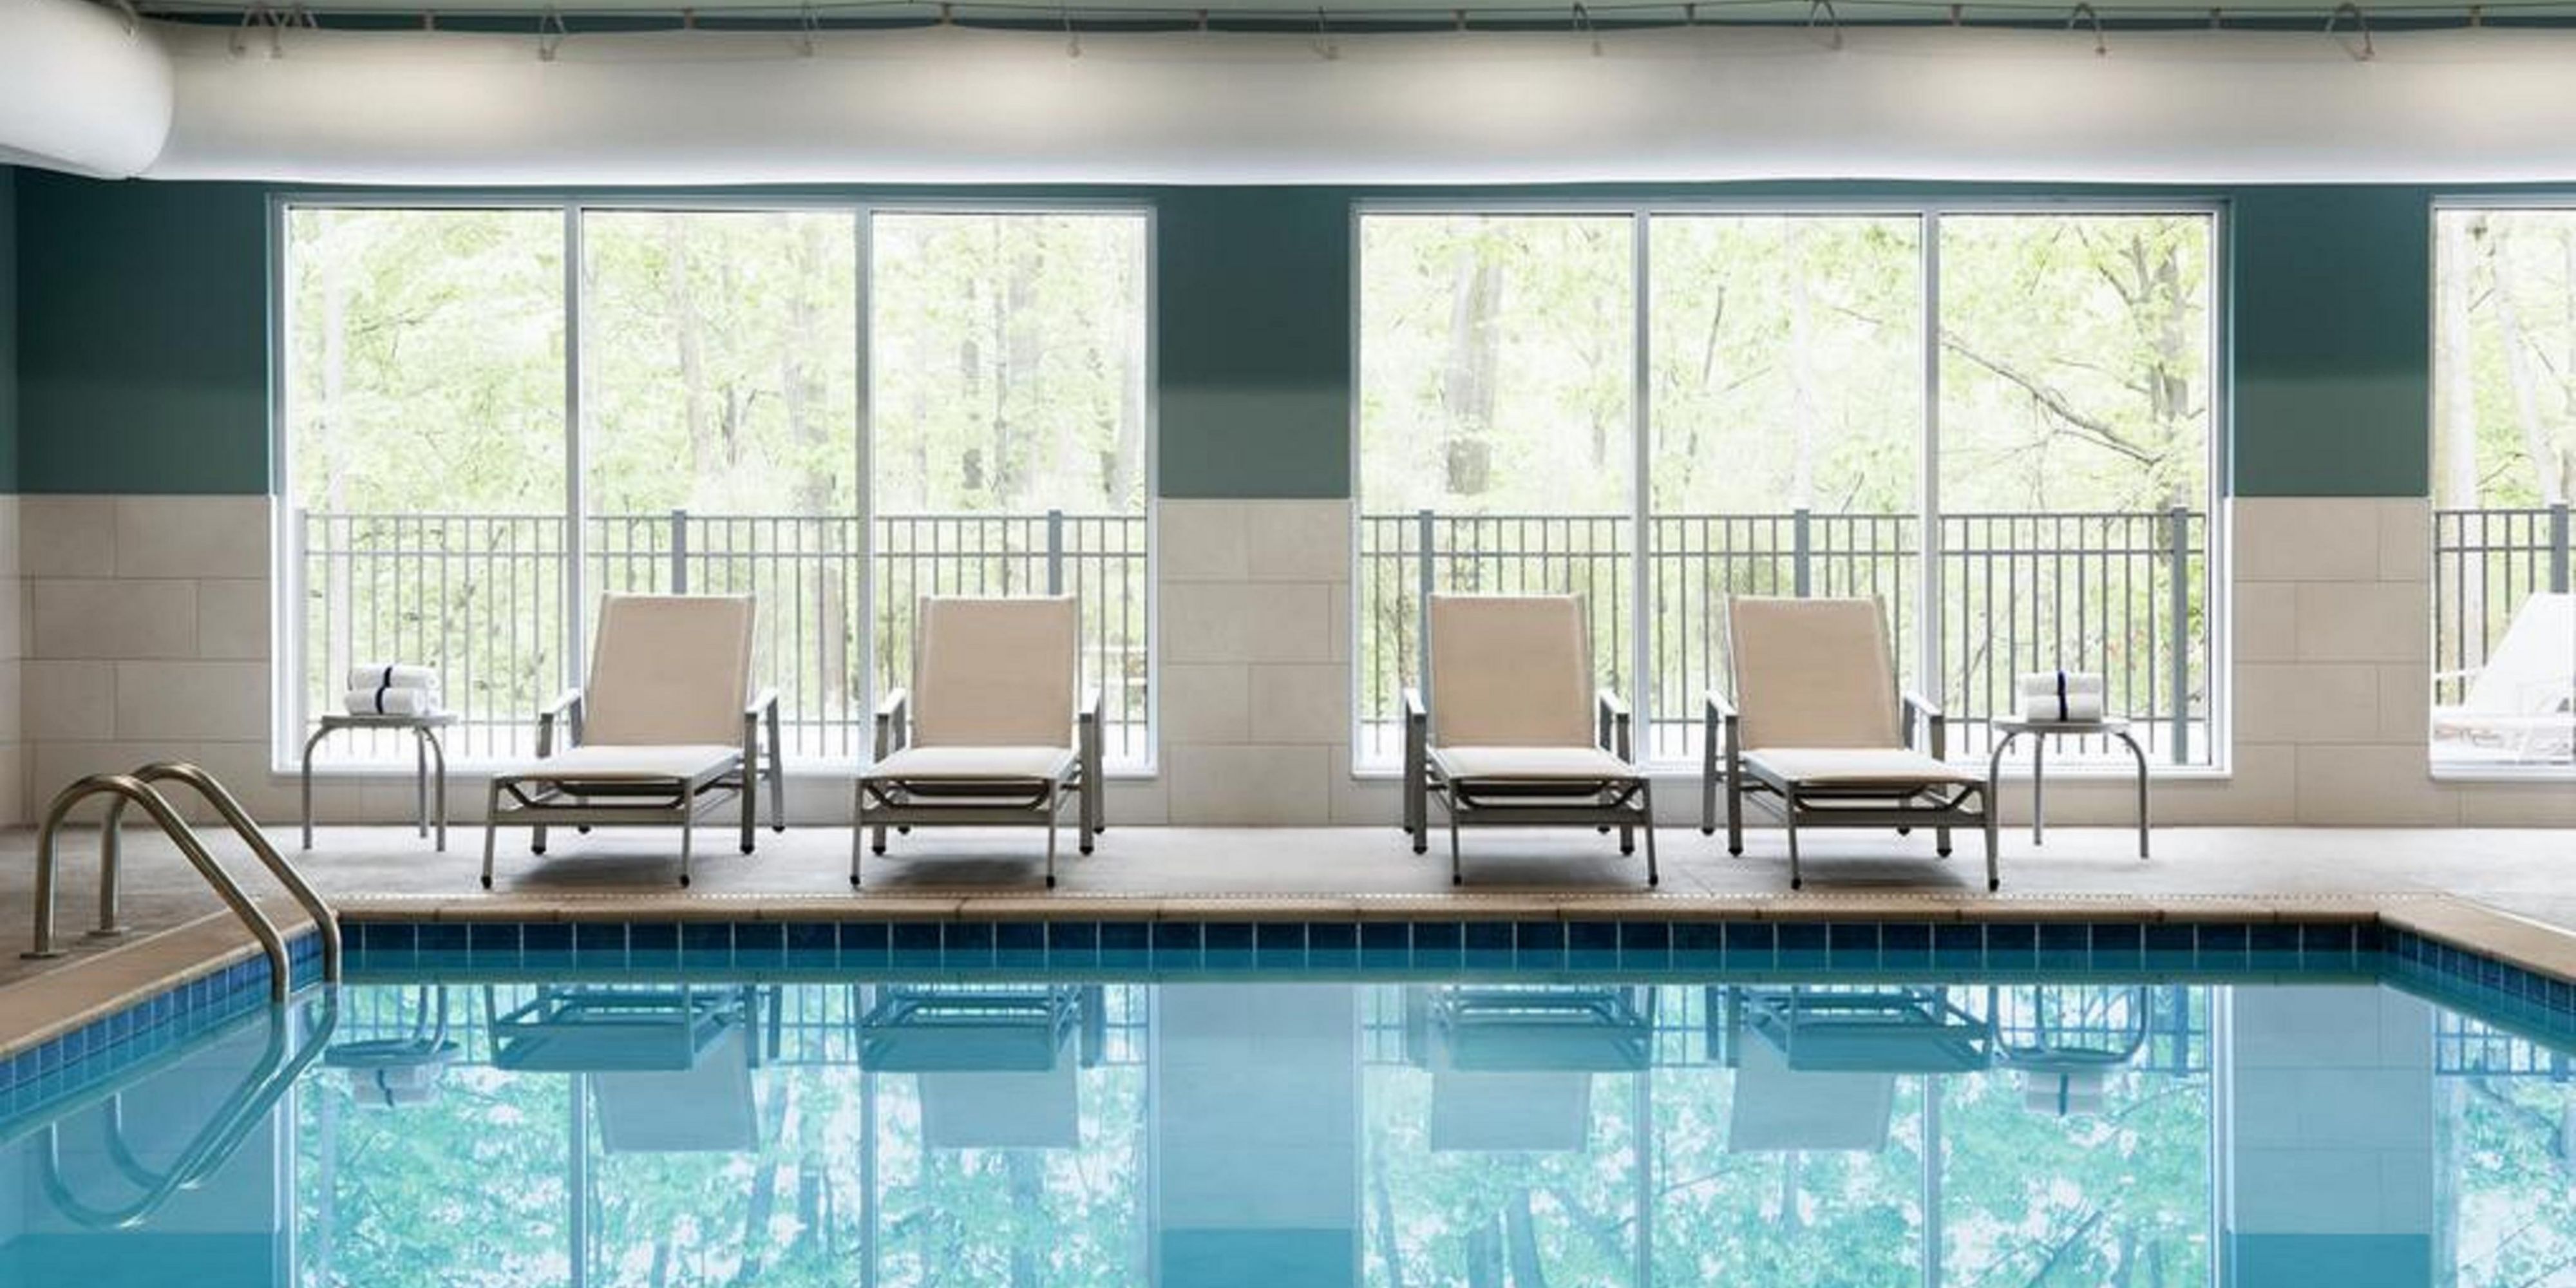 You will enjoy relaxing in our indoor heated pool, open year round. Our indoor pool also has quick. Open 8:00 AM - 10:00 PM every day.